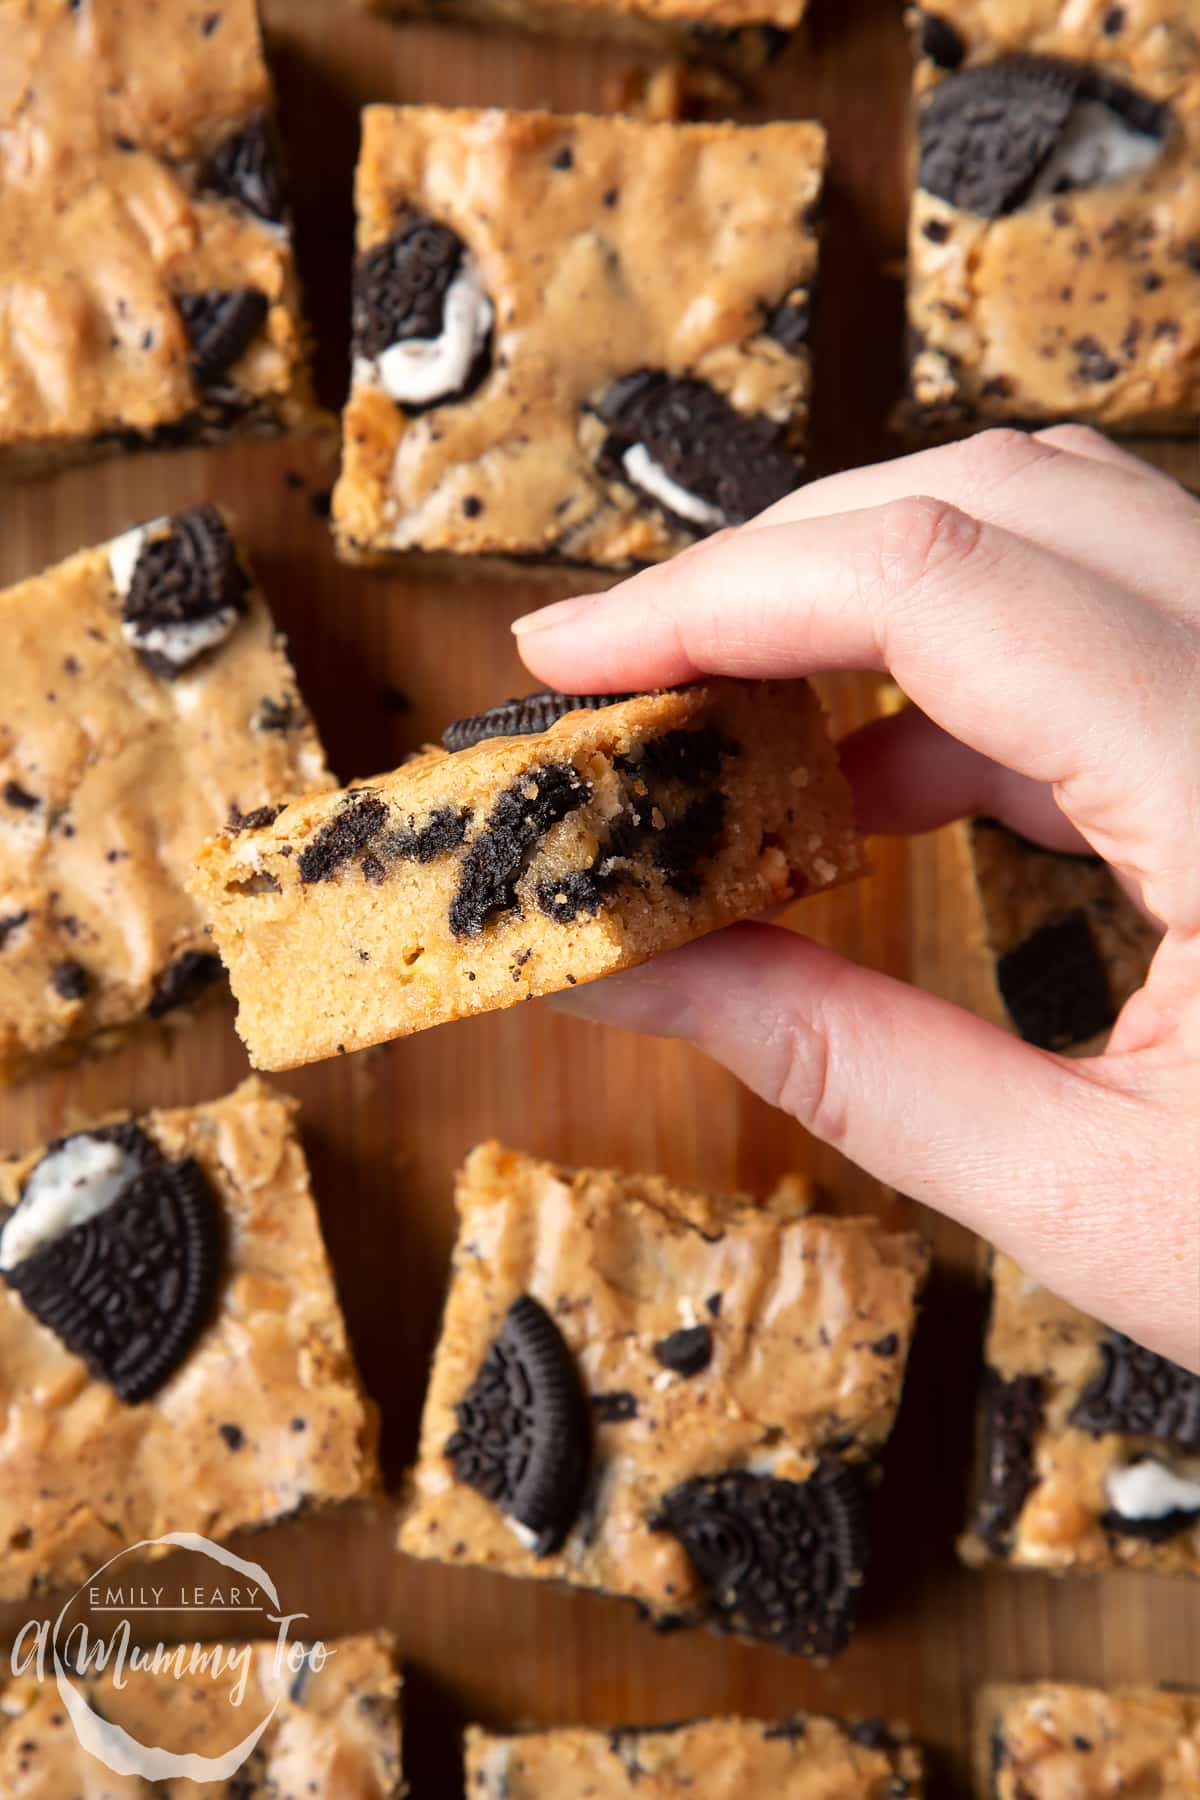 Overhead view of a hand holding an Oreo Blondie over a wooden board